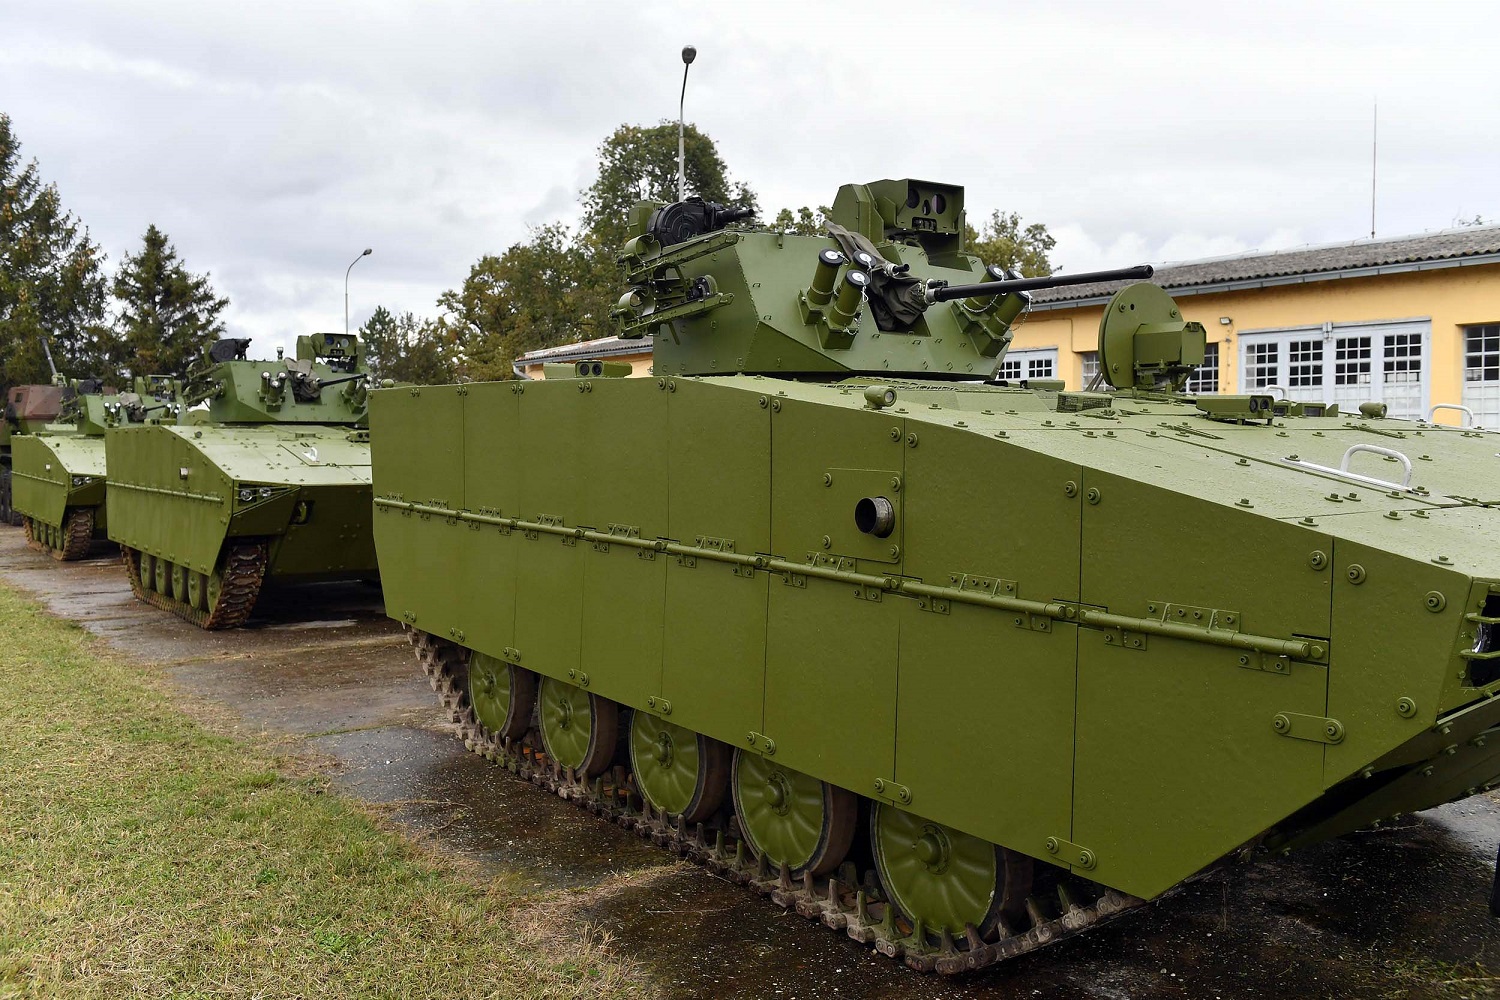 M80AB1 tracked armoured fighting vehicles